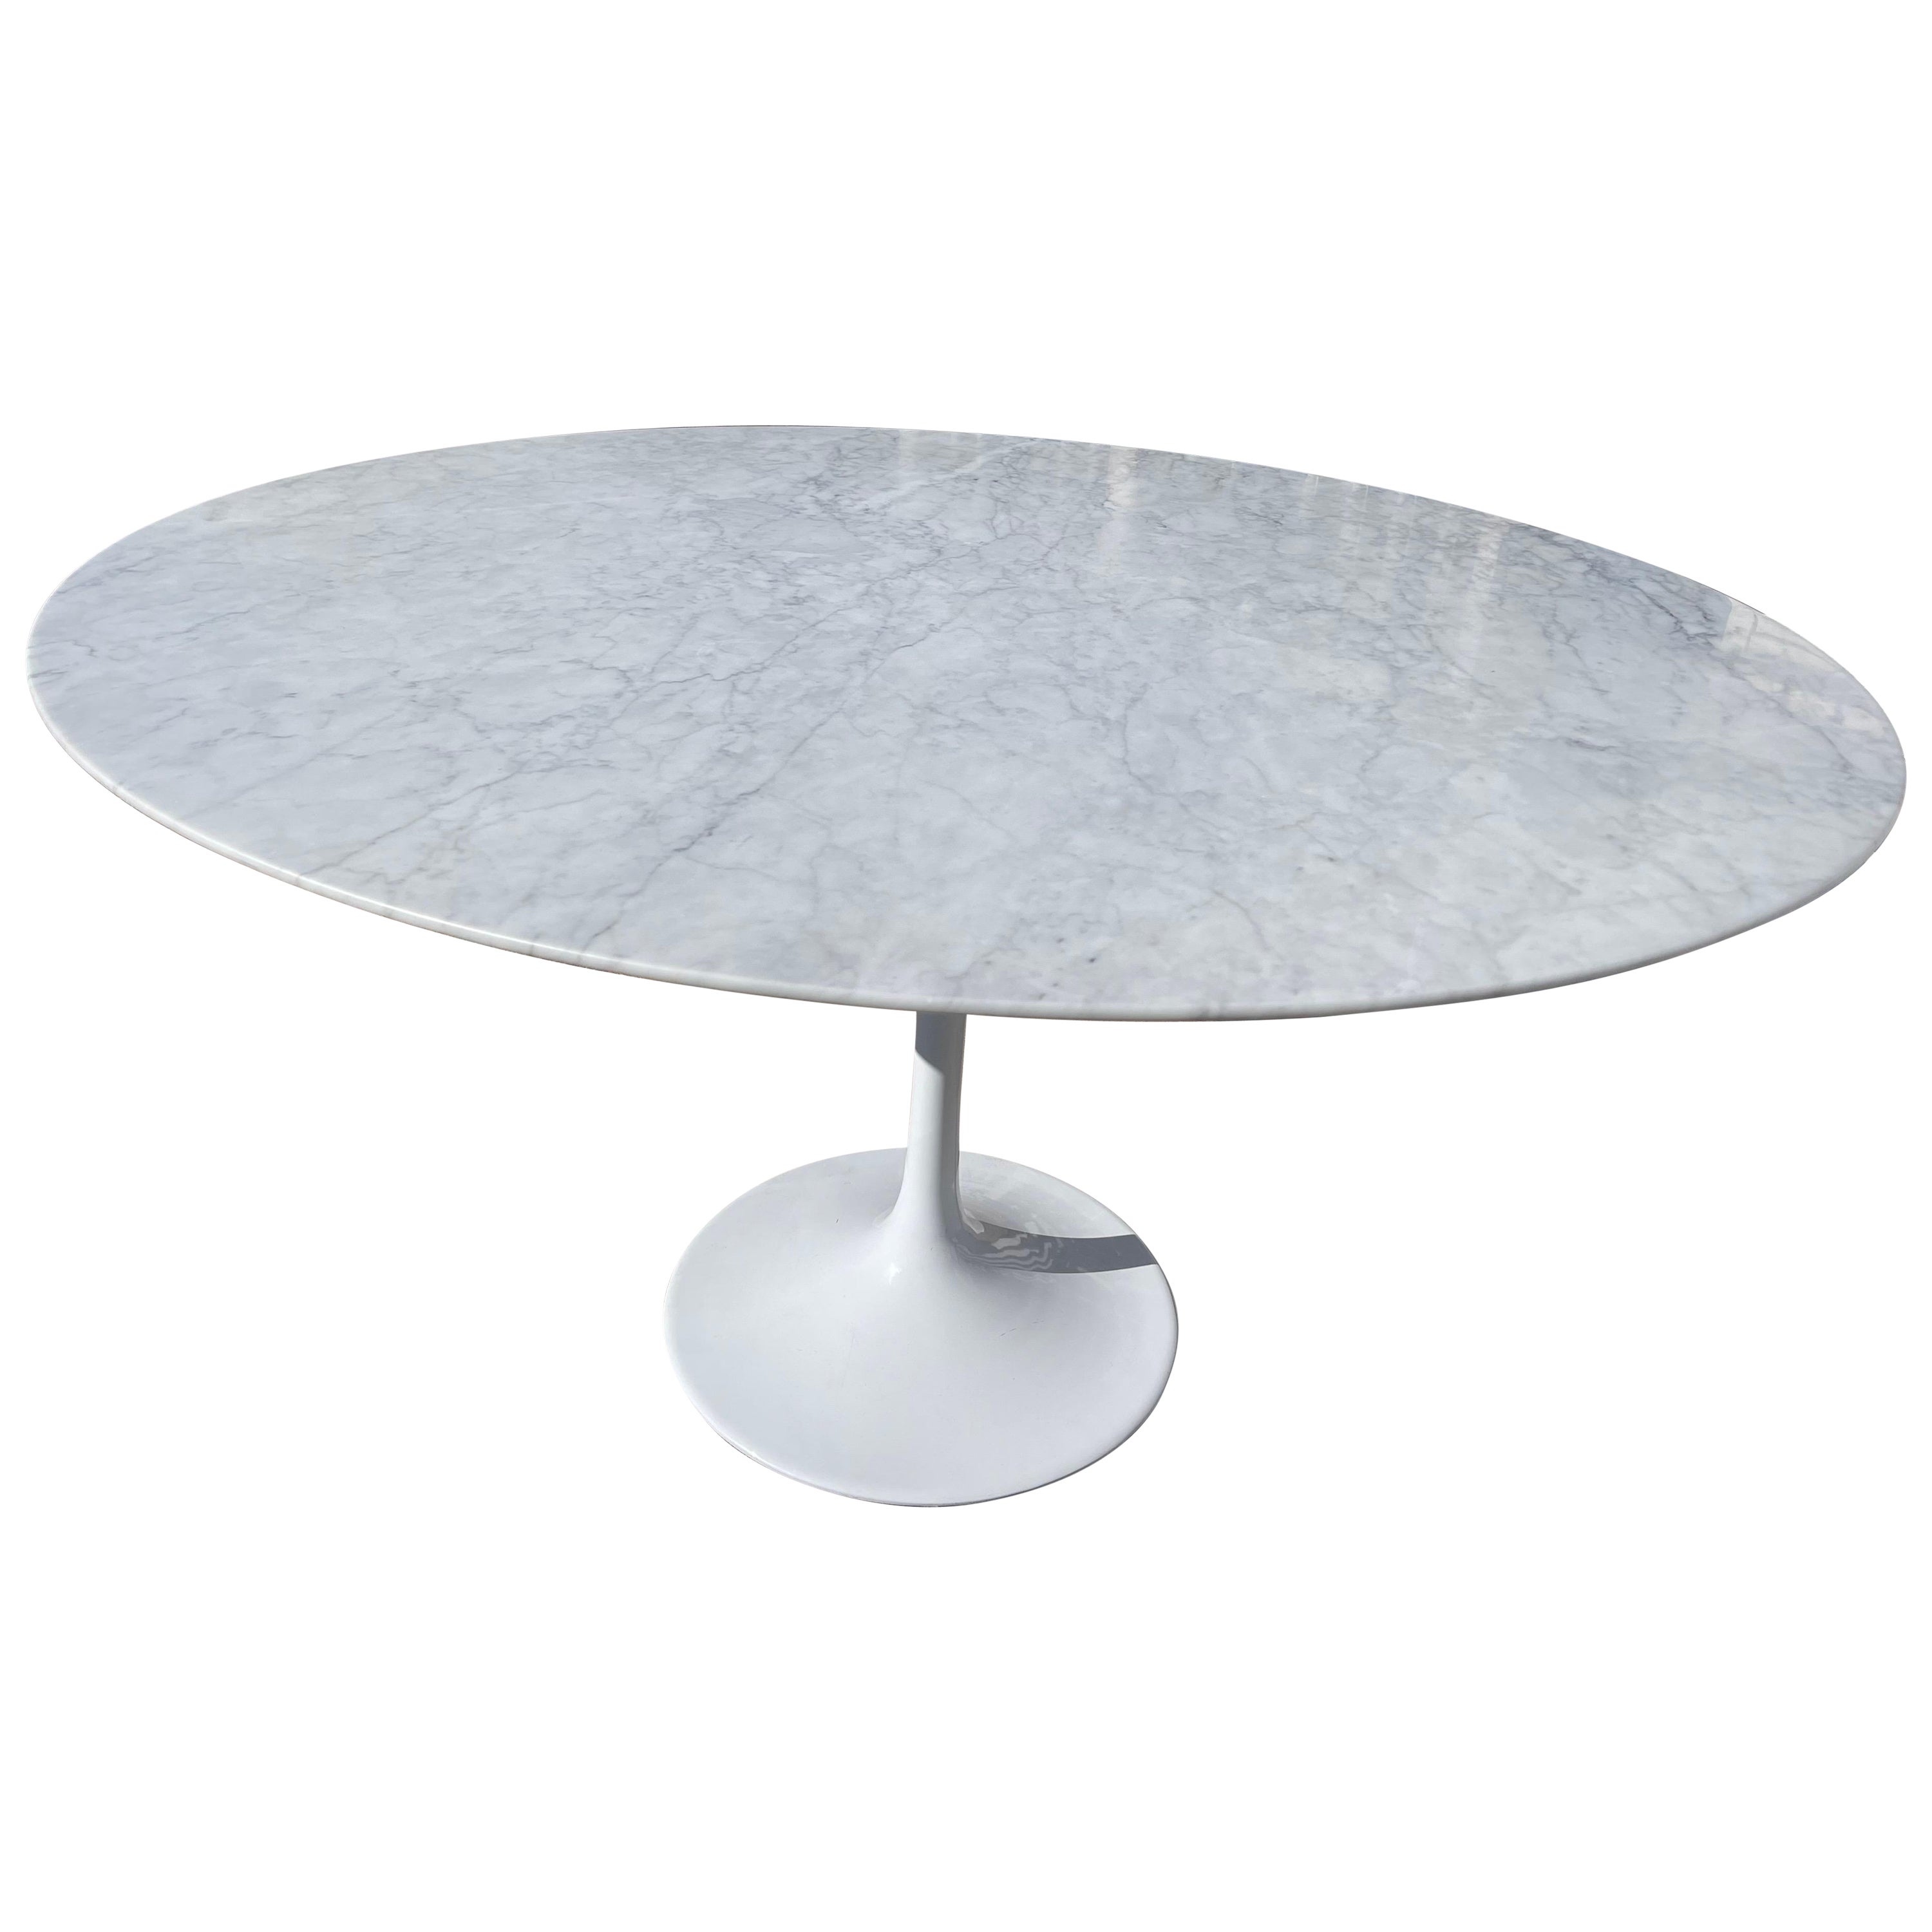 Round Carrara Marble Dining Table after Eero Saarinen’s “Tulip Table” for Knoll  For Sale